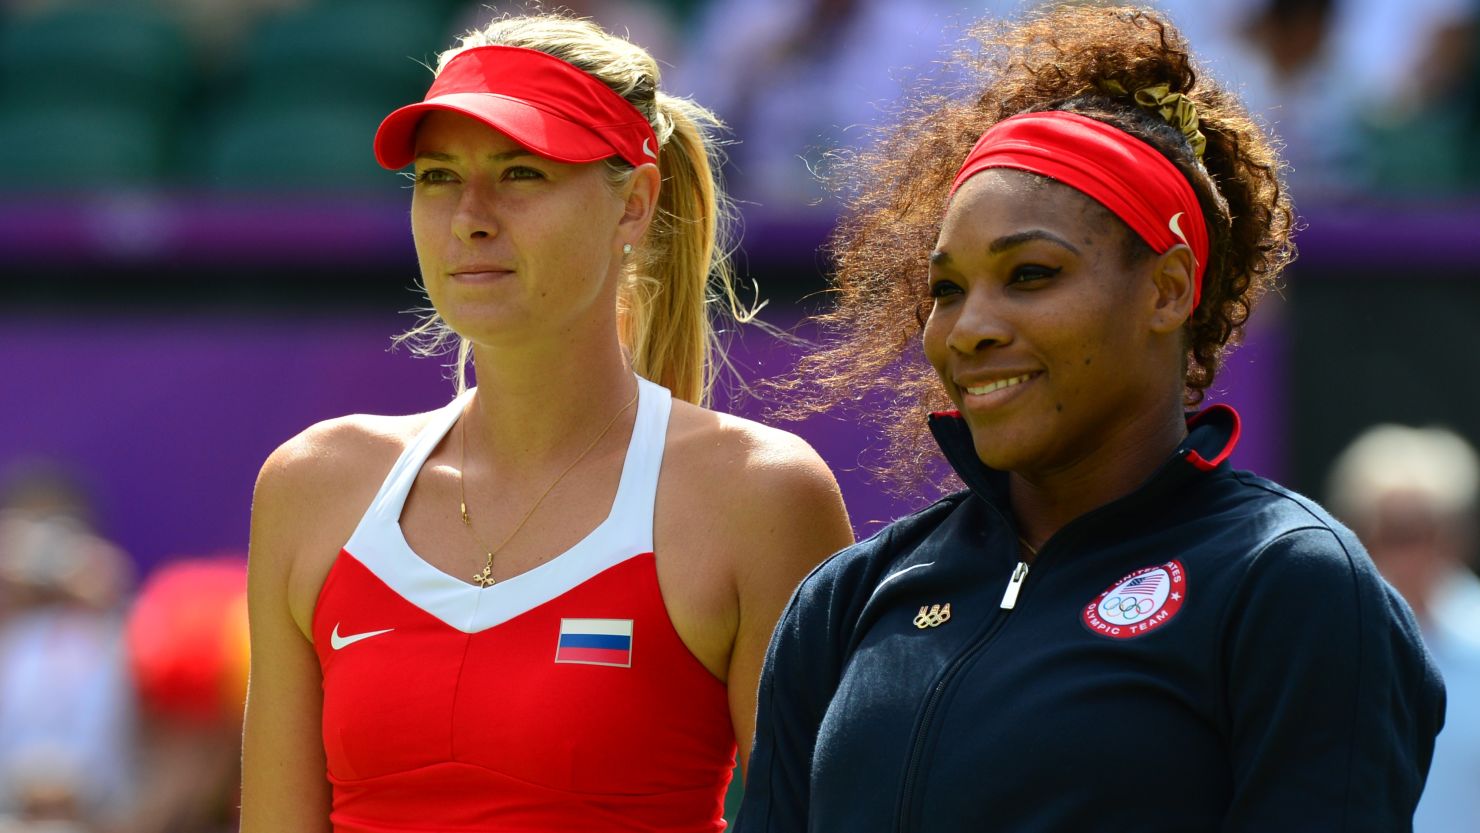 Maria Sharapova and Serena Williams are both expected to compete at the upcoming Brisbane International.